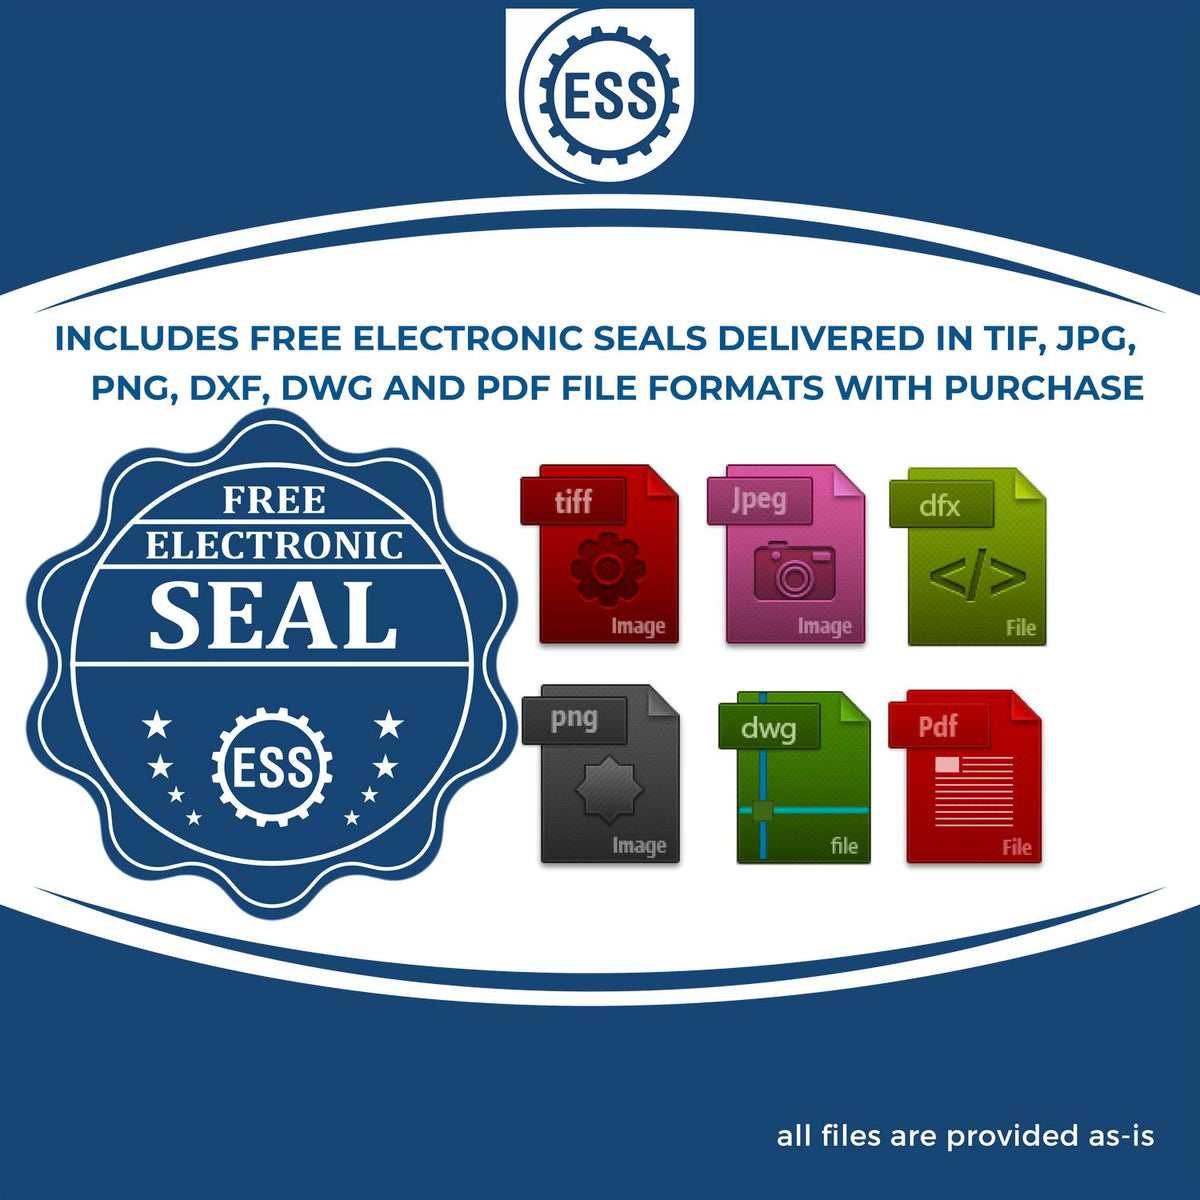 An infographic for the free electronic seal for the Hybrid Iowa Geologist Seal illustrating the different file type icons such as DXF, DWG, TIF, JPG and PNG.